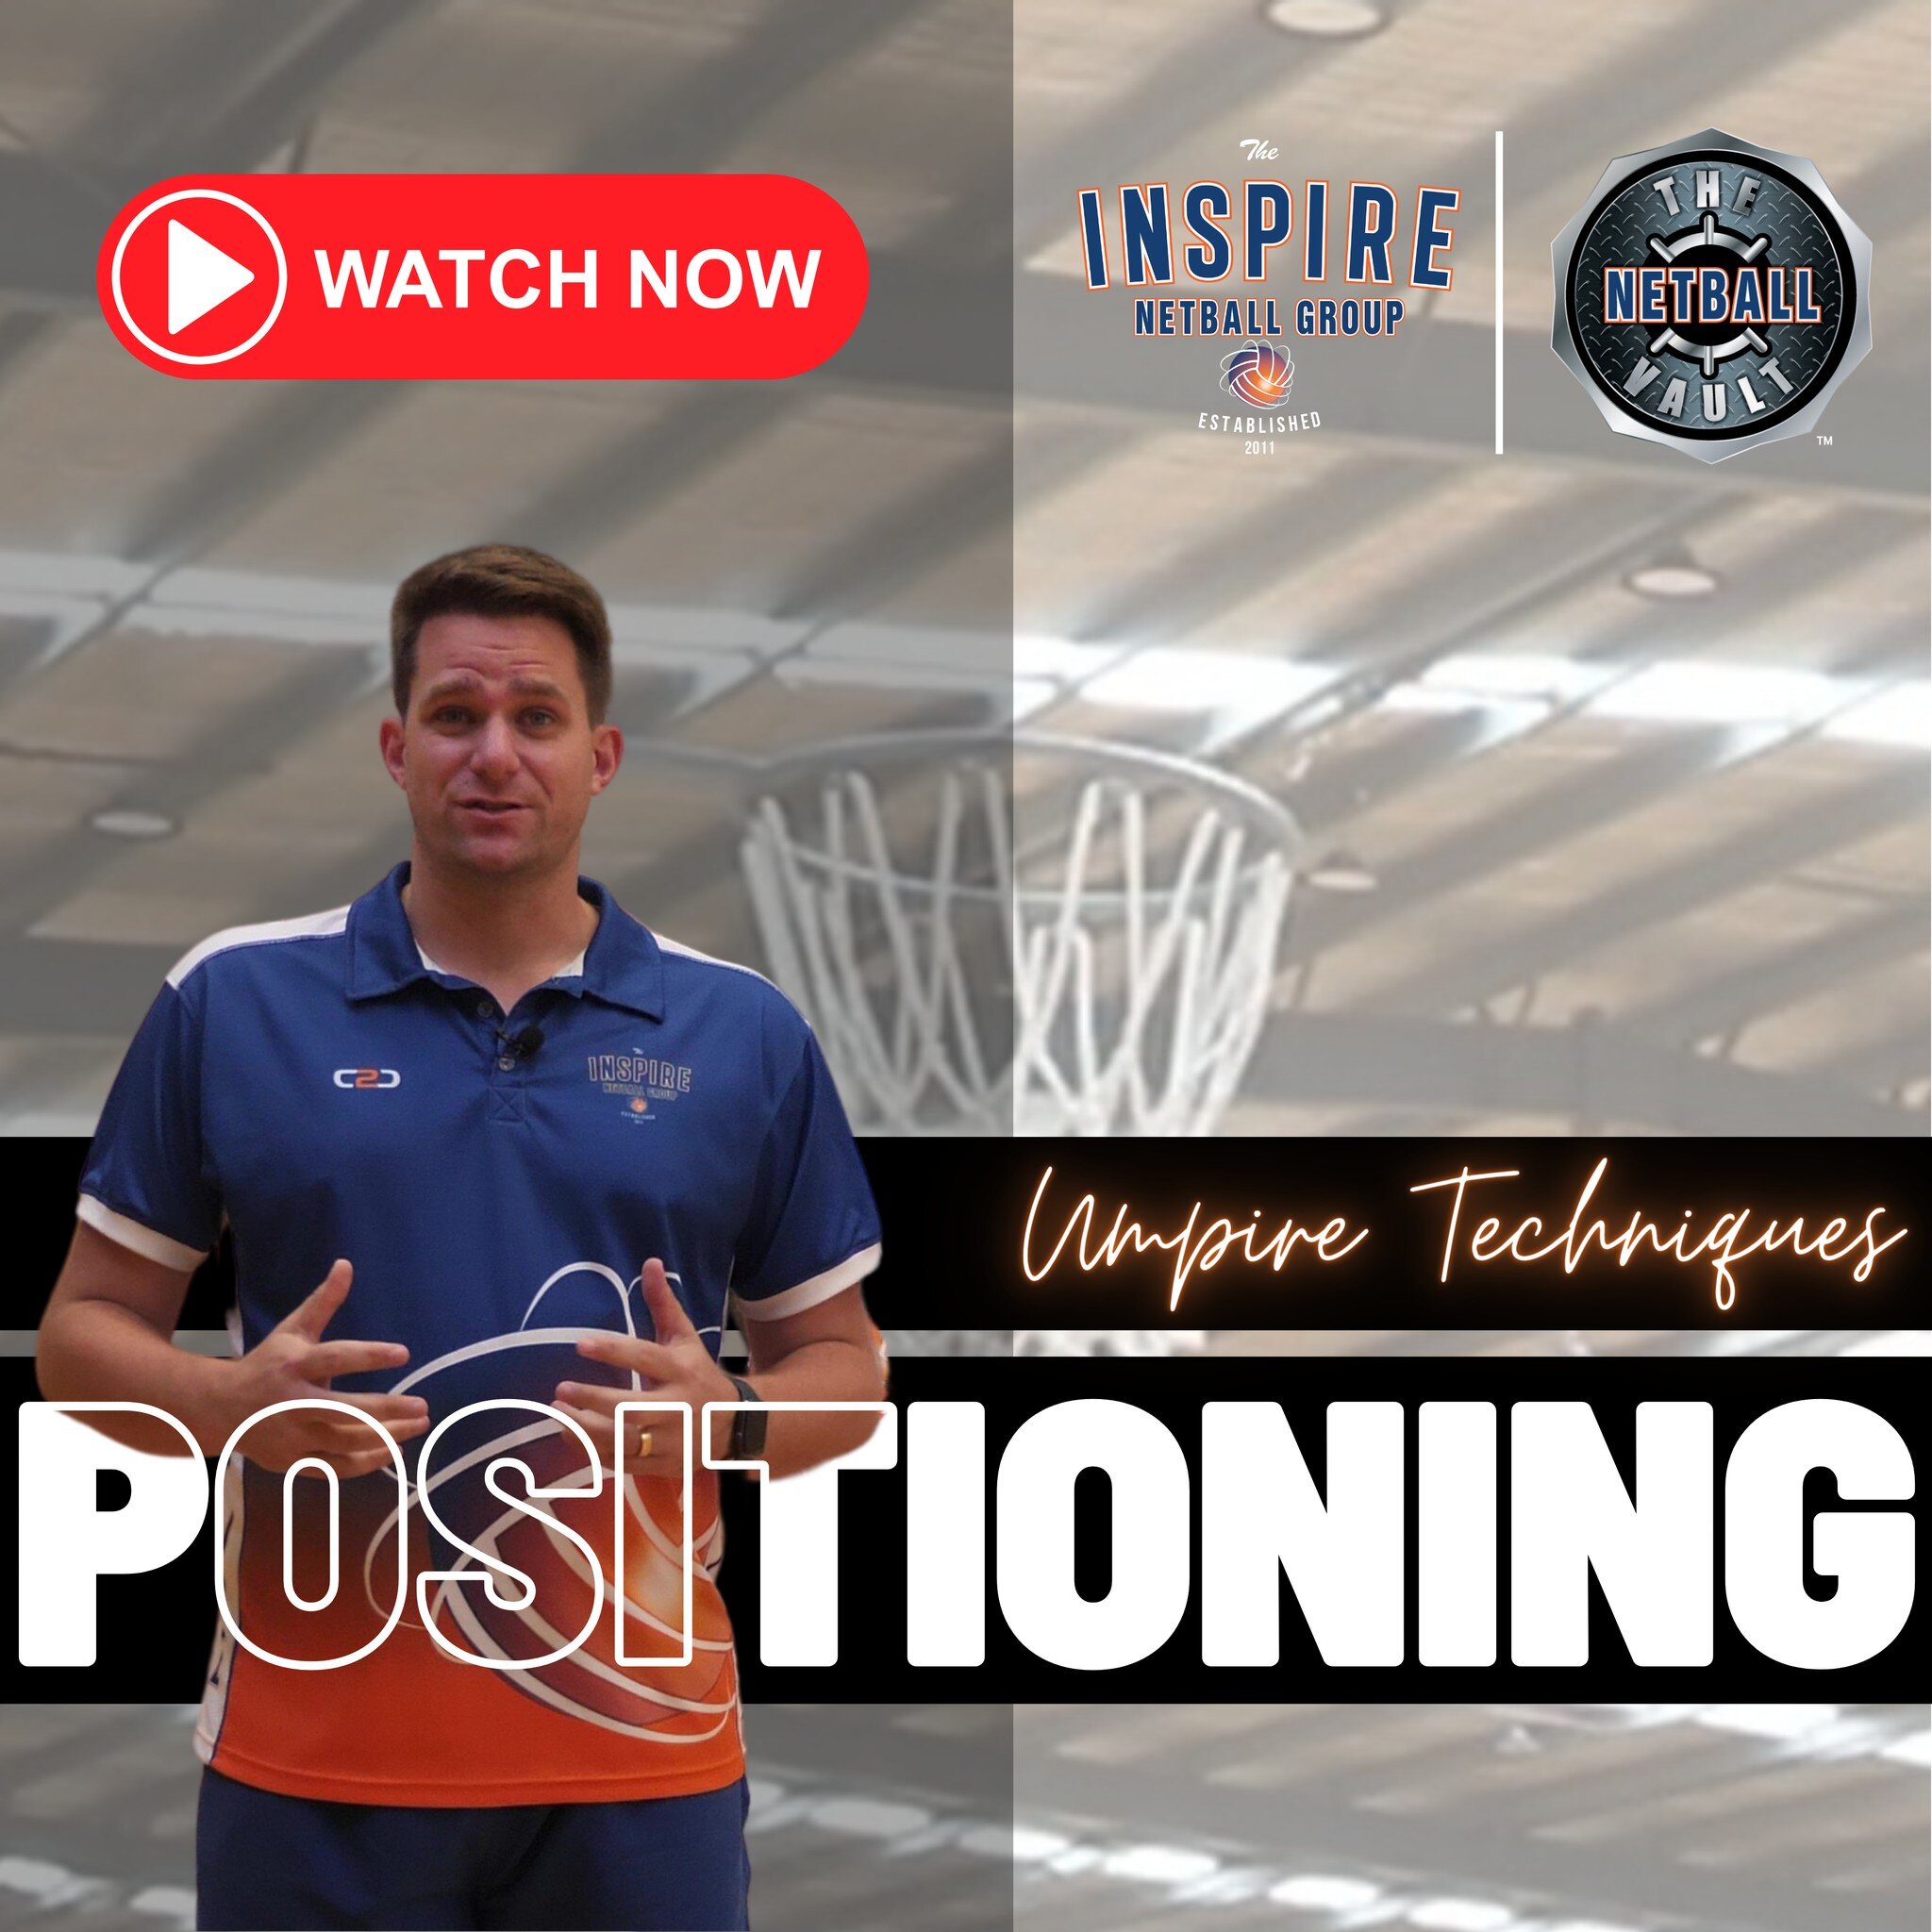 Calling all UMPIRES 📣 - NOW LIVE
.
THE NETBALL VAULT&trade; NEW RELEASE - Umpiring Techniques: Positioning
.
As promised, here is the NEW RELEASE on Umpiring Techniques including:
.
✅ Positioning on centre passes
✅ Assessing play in the near channel